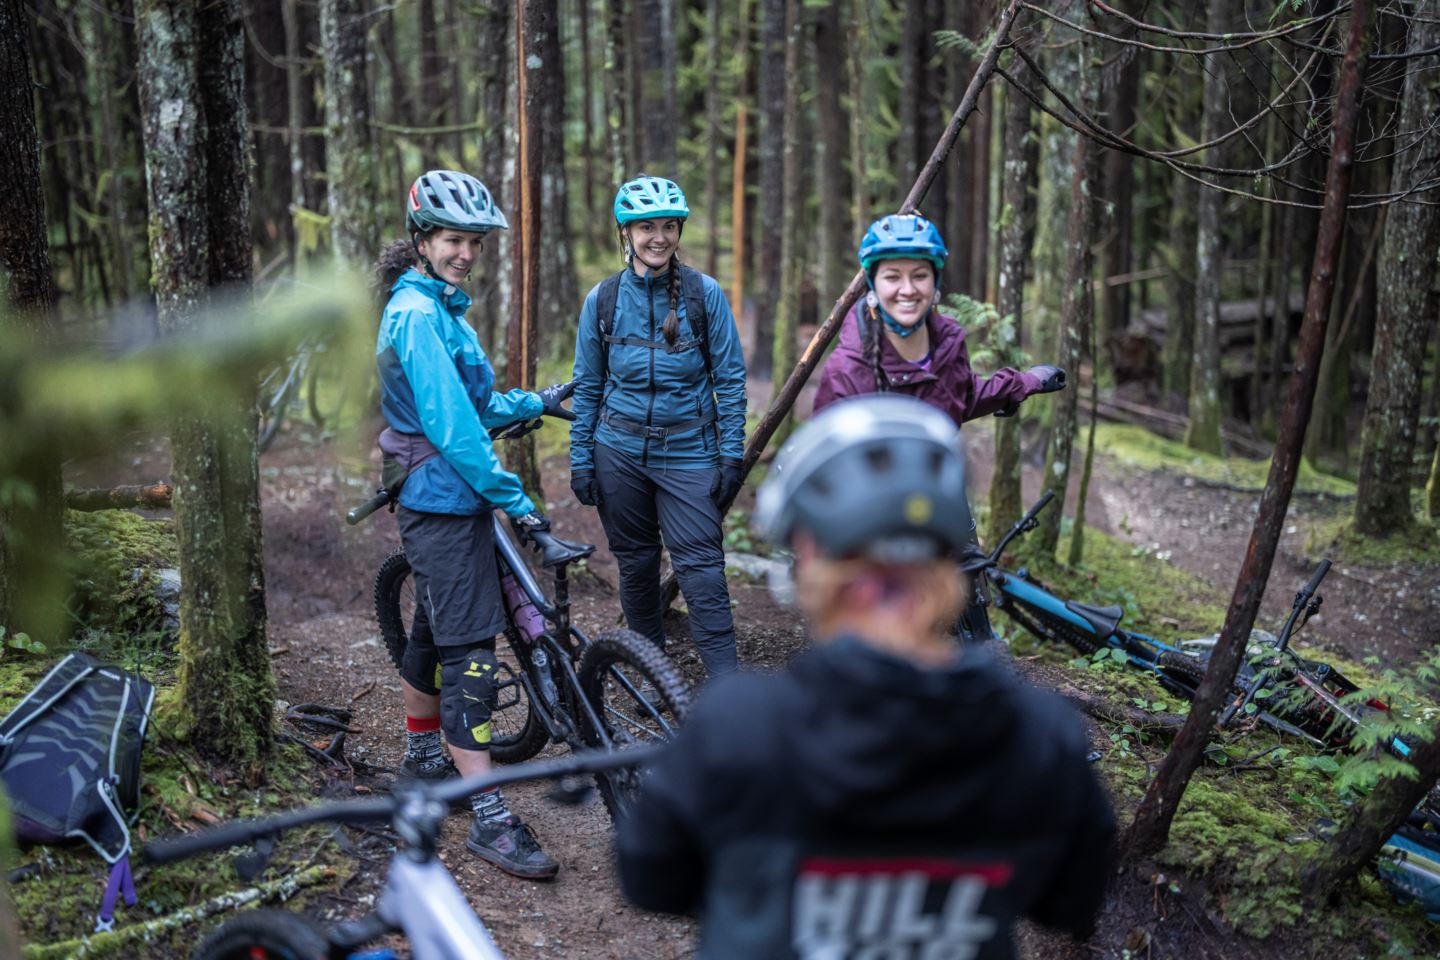 A group of riders talks in the woods